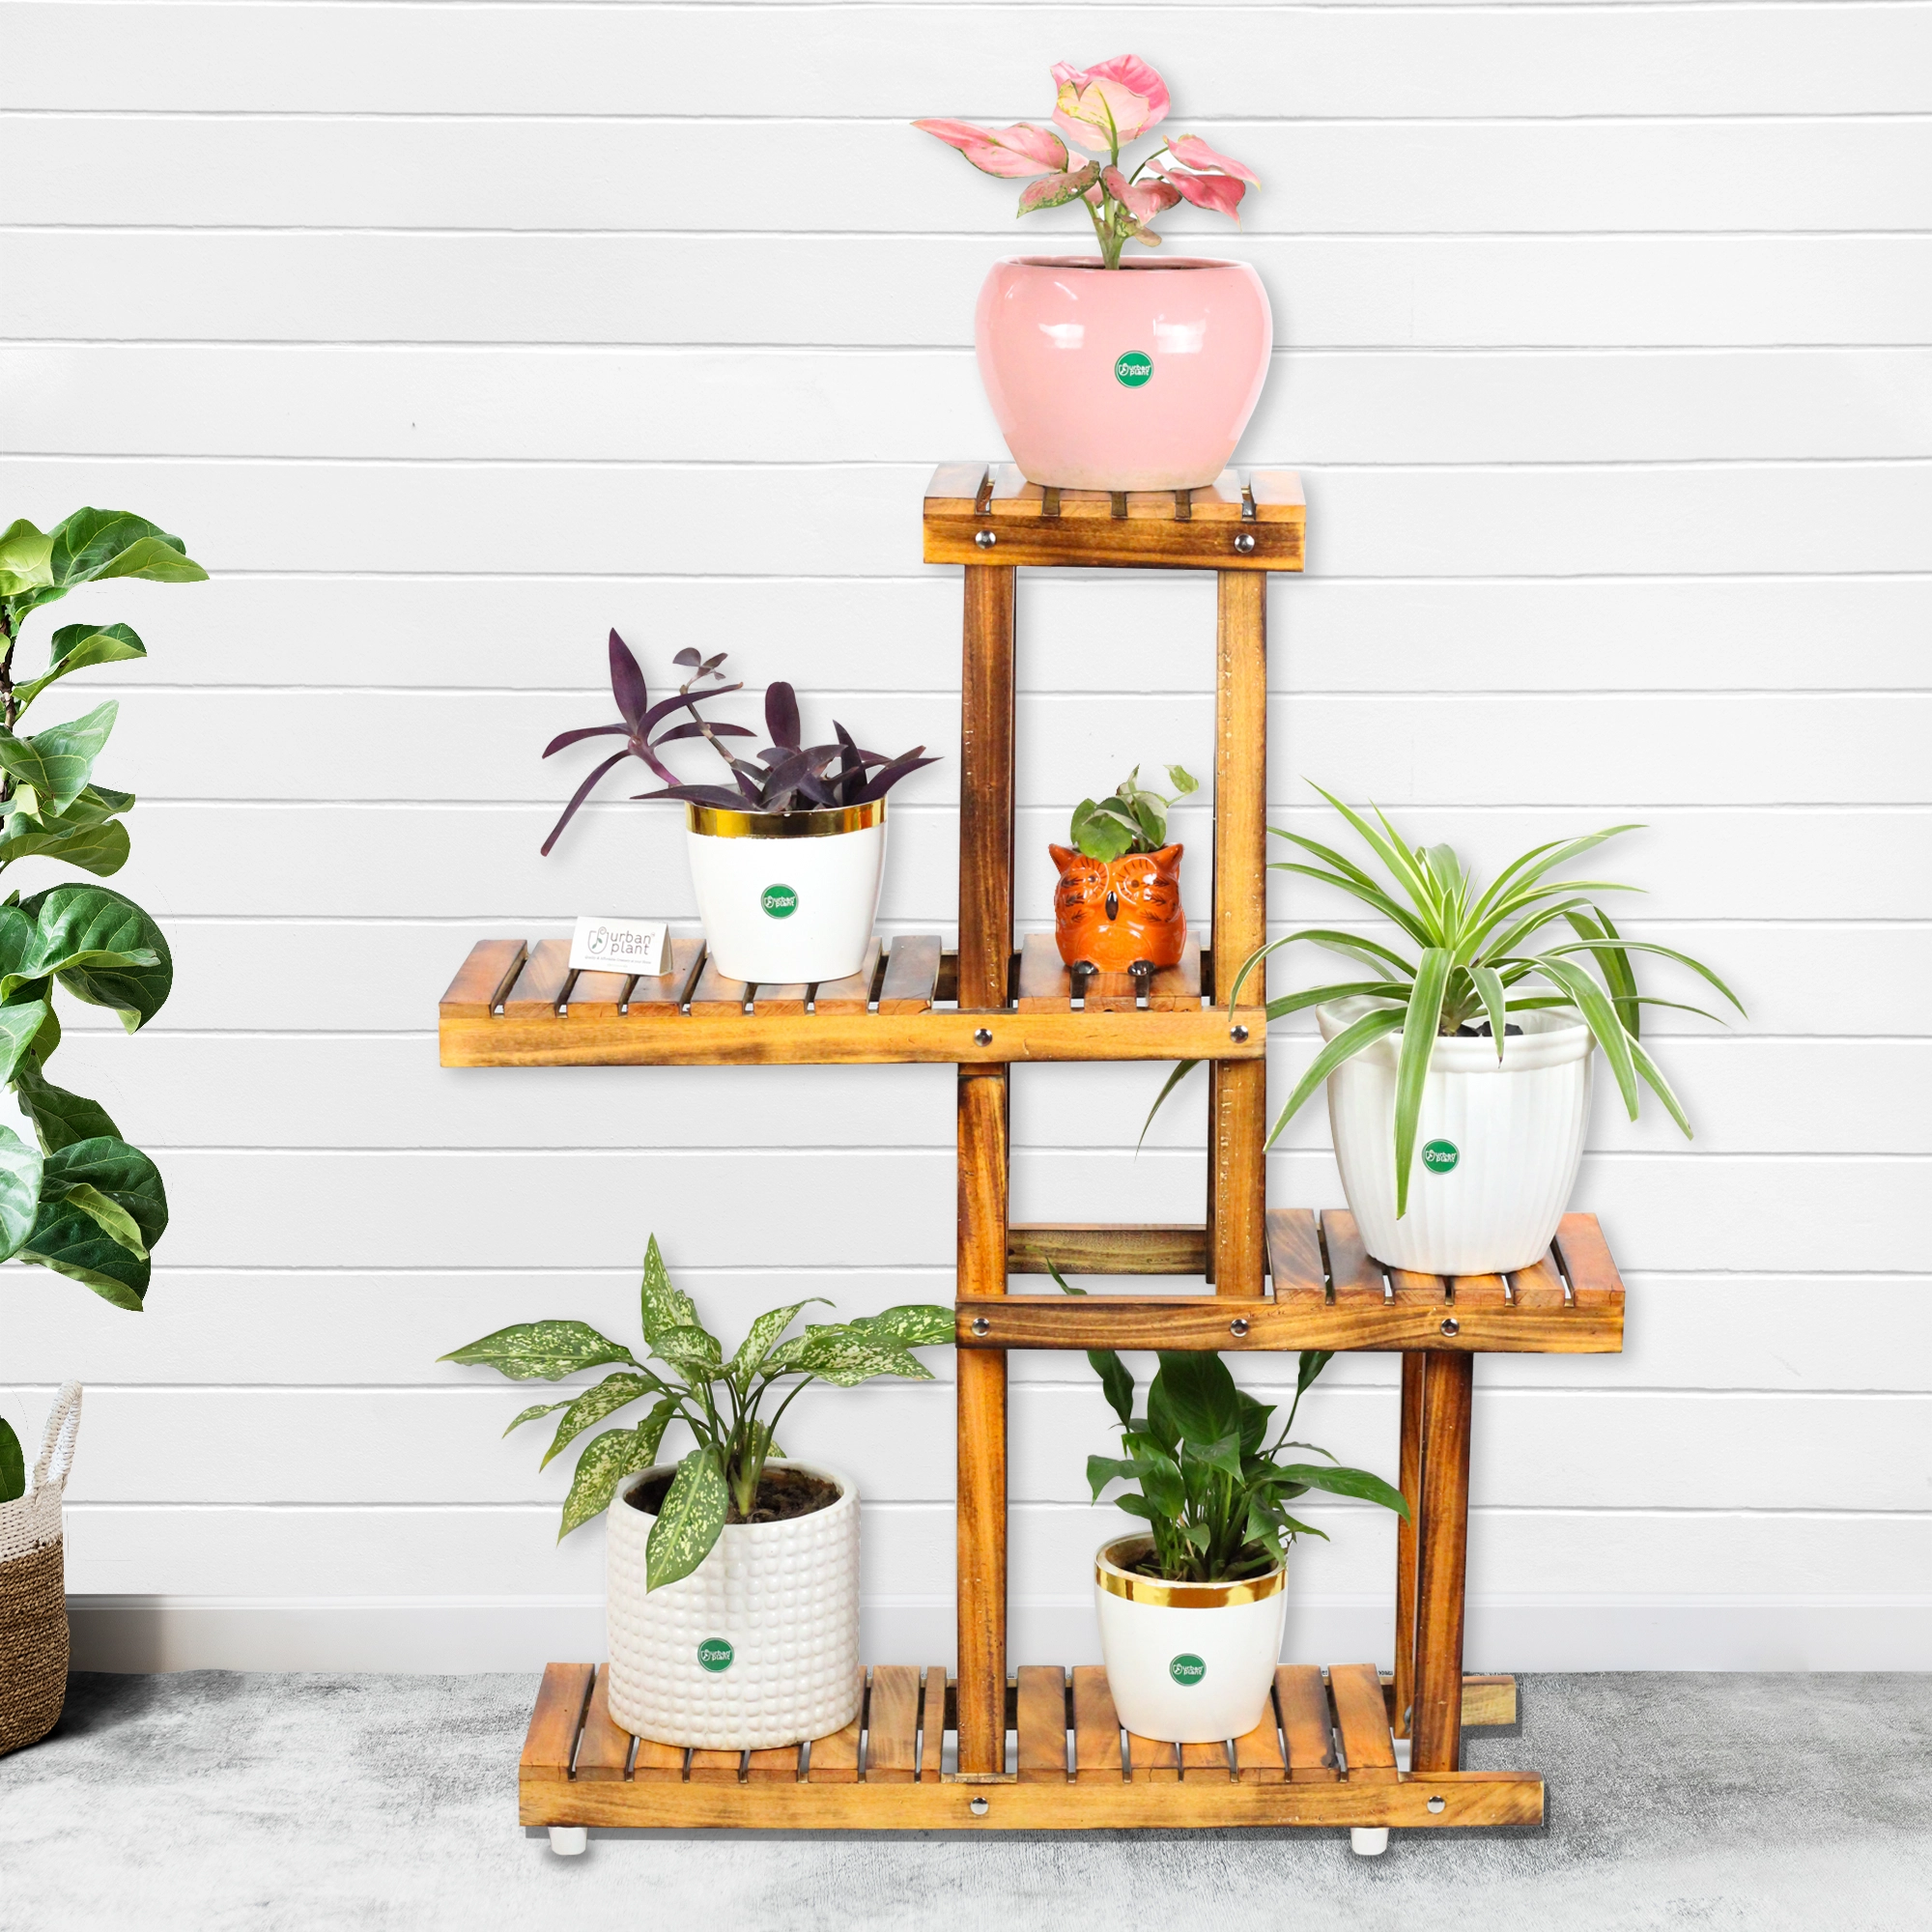 4-Tier Wooden Stand Urban Plant 